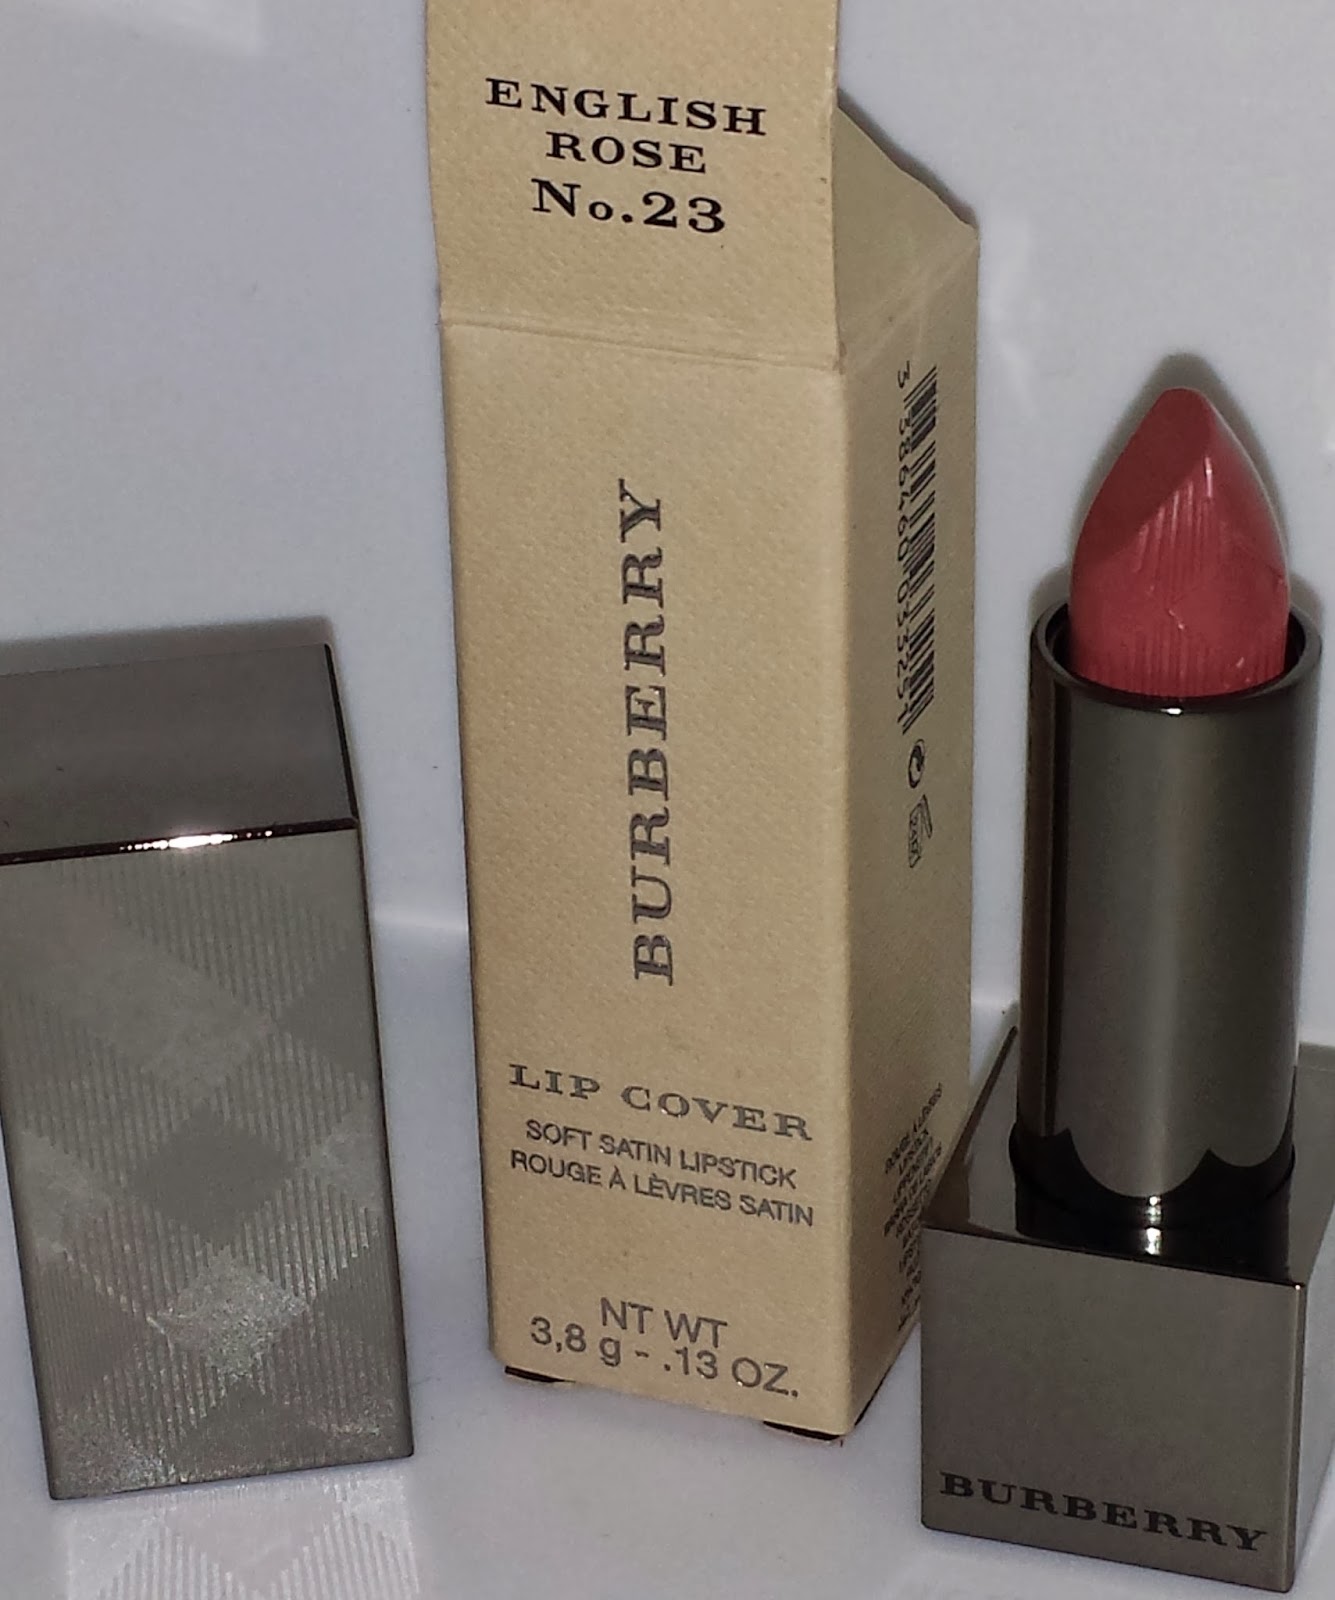 Jayded Dreaming Beauty Blog : 23 ENGLISH ROSE BURBERRY LIP COVER SATIN LIPSTICK - SWATCHES AND REVIEW